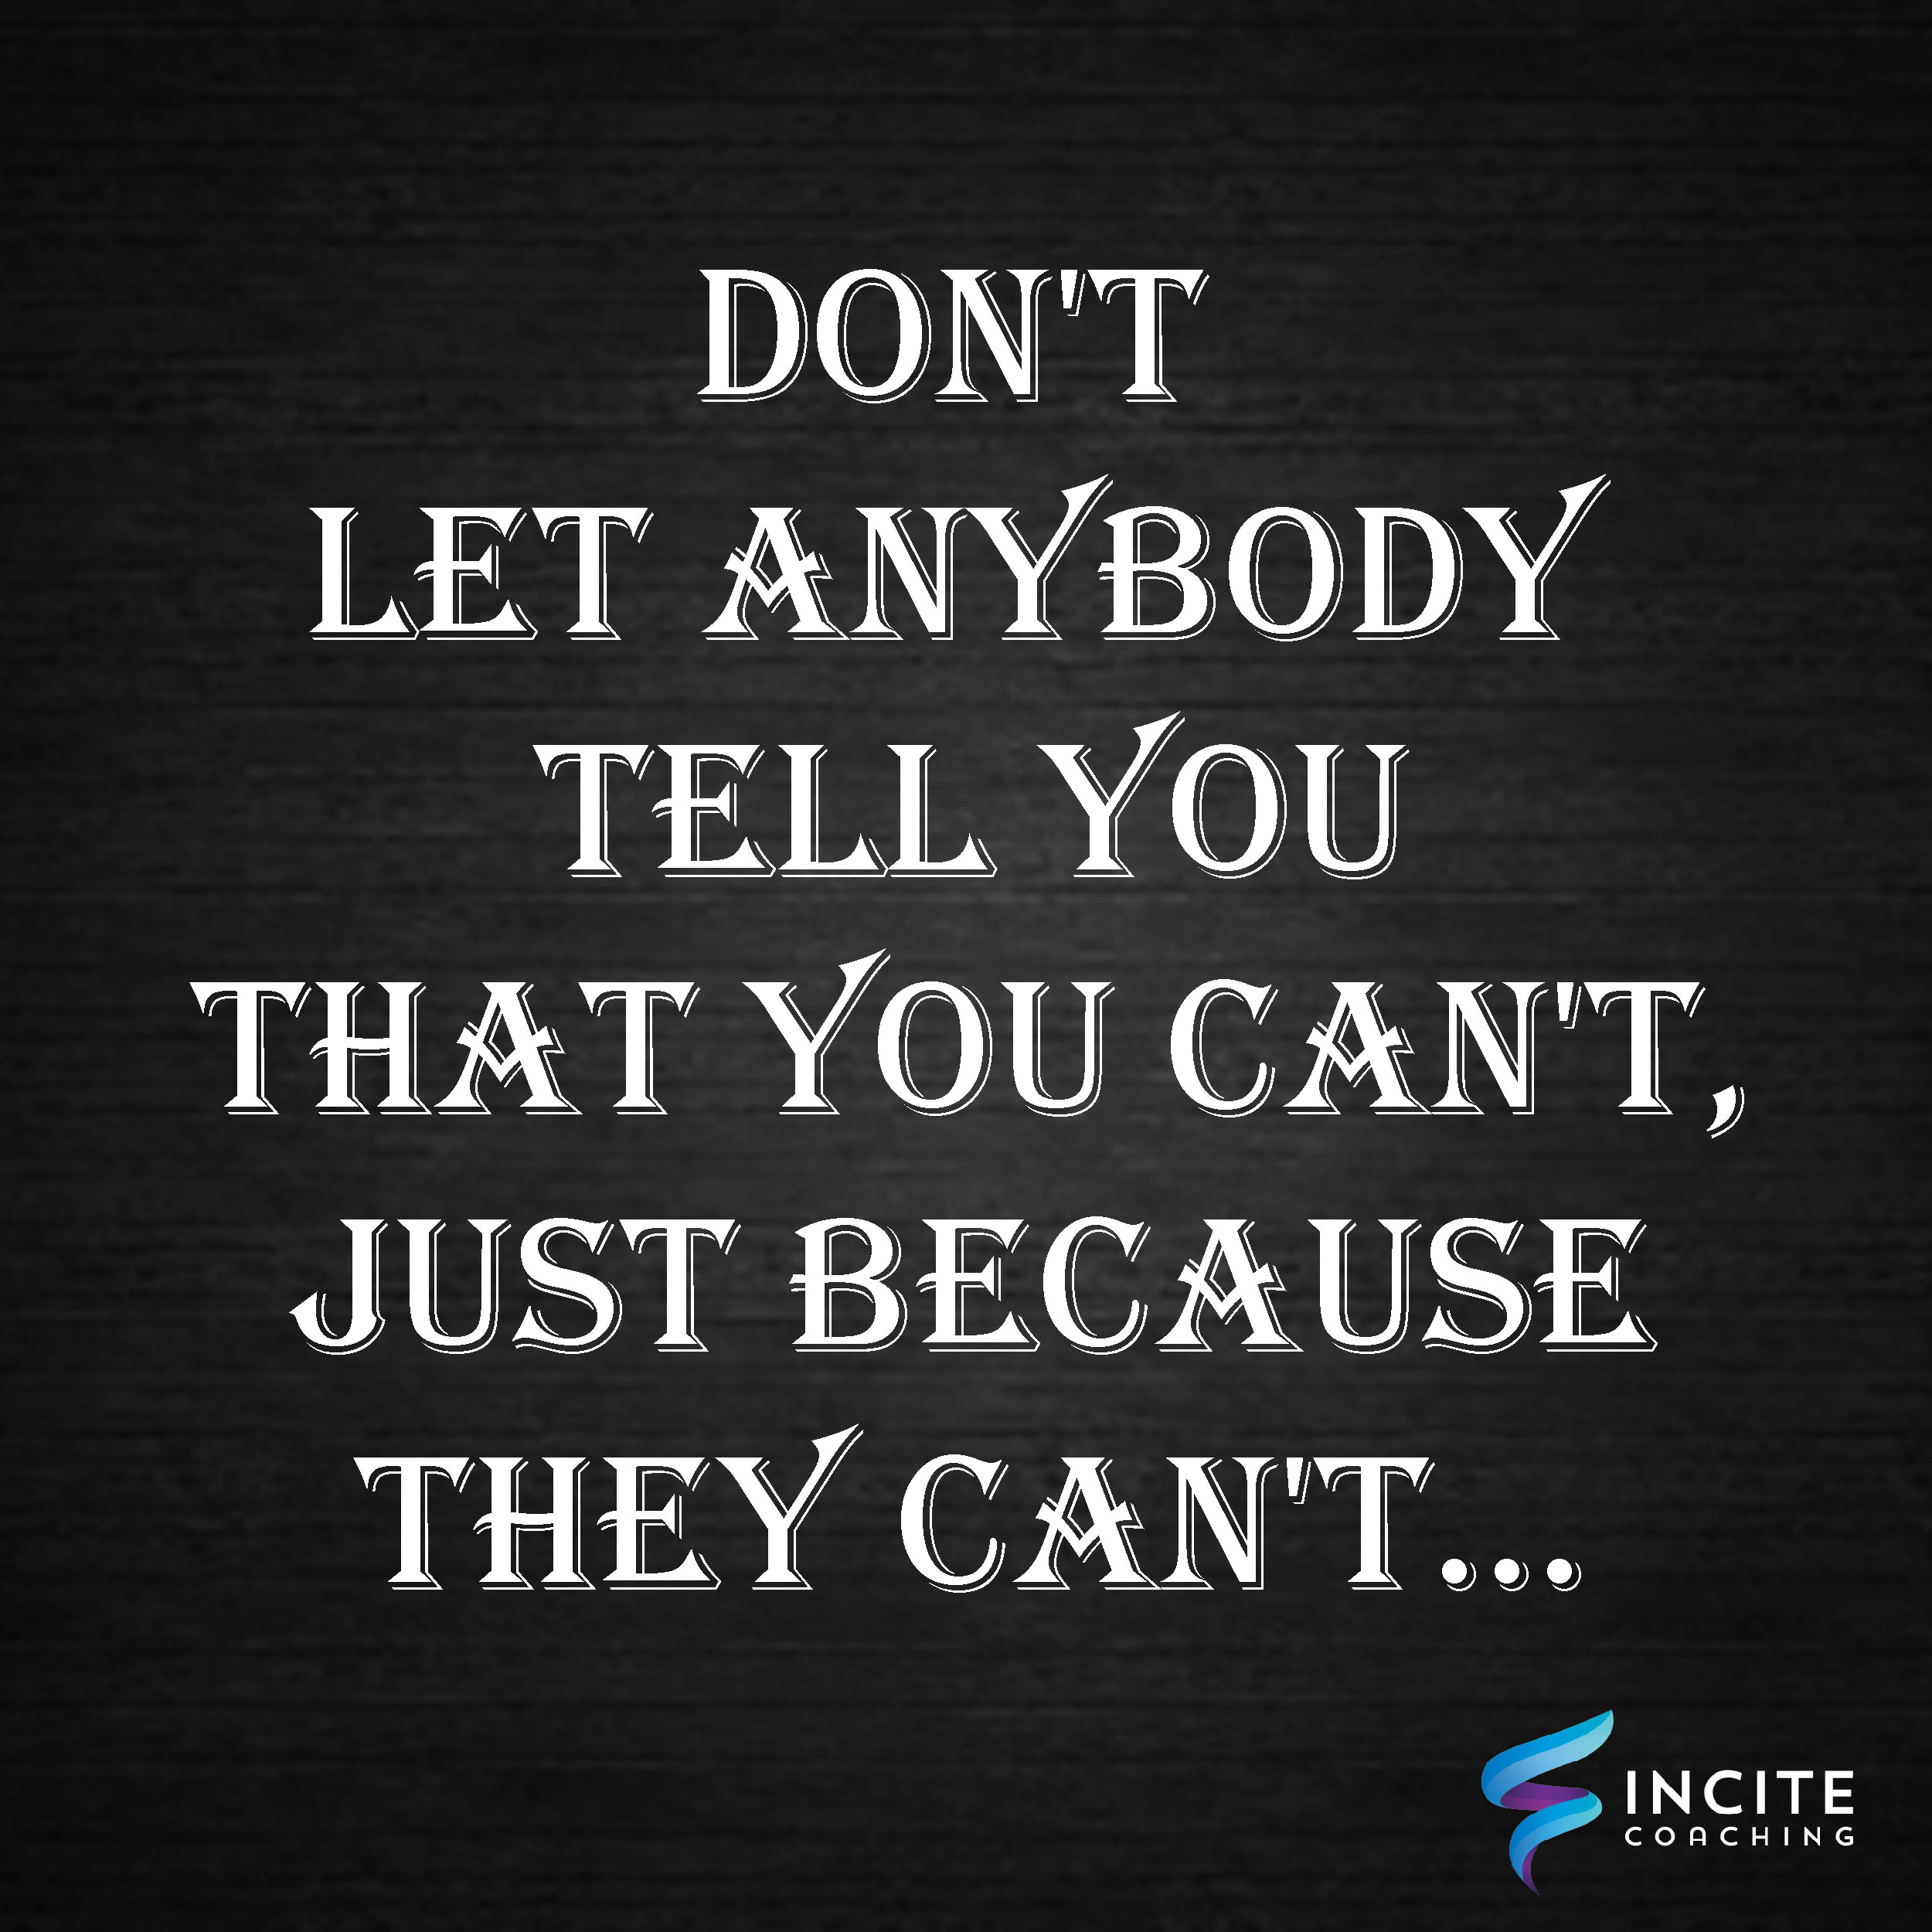 Don’t let anybody tell you, YOU CAN’T just because they can’t!